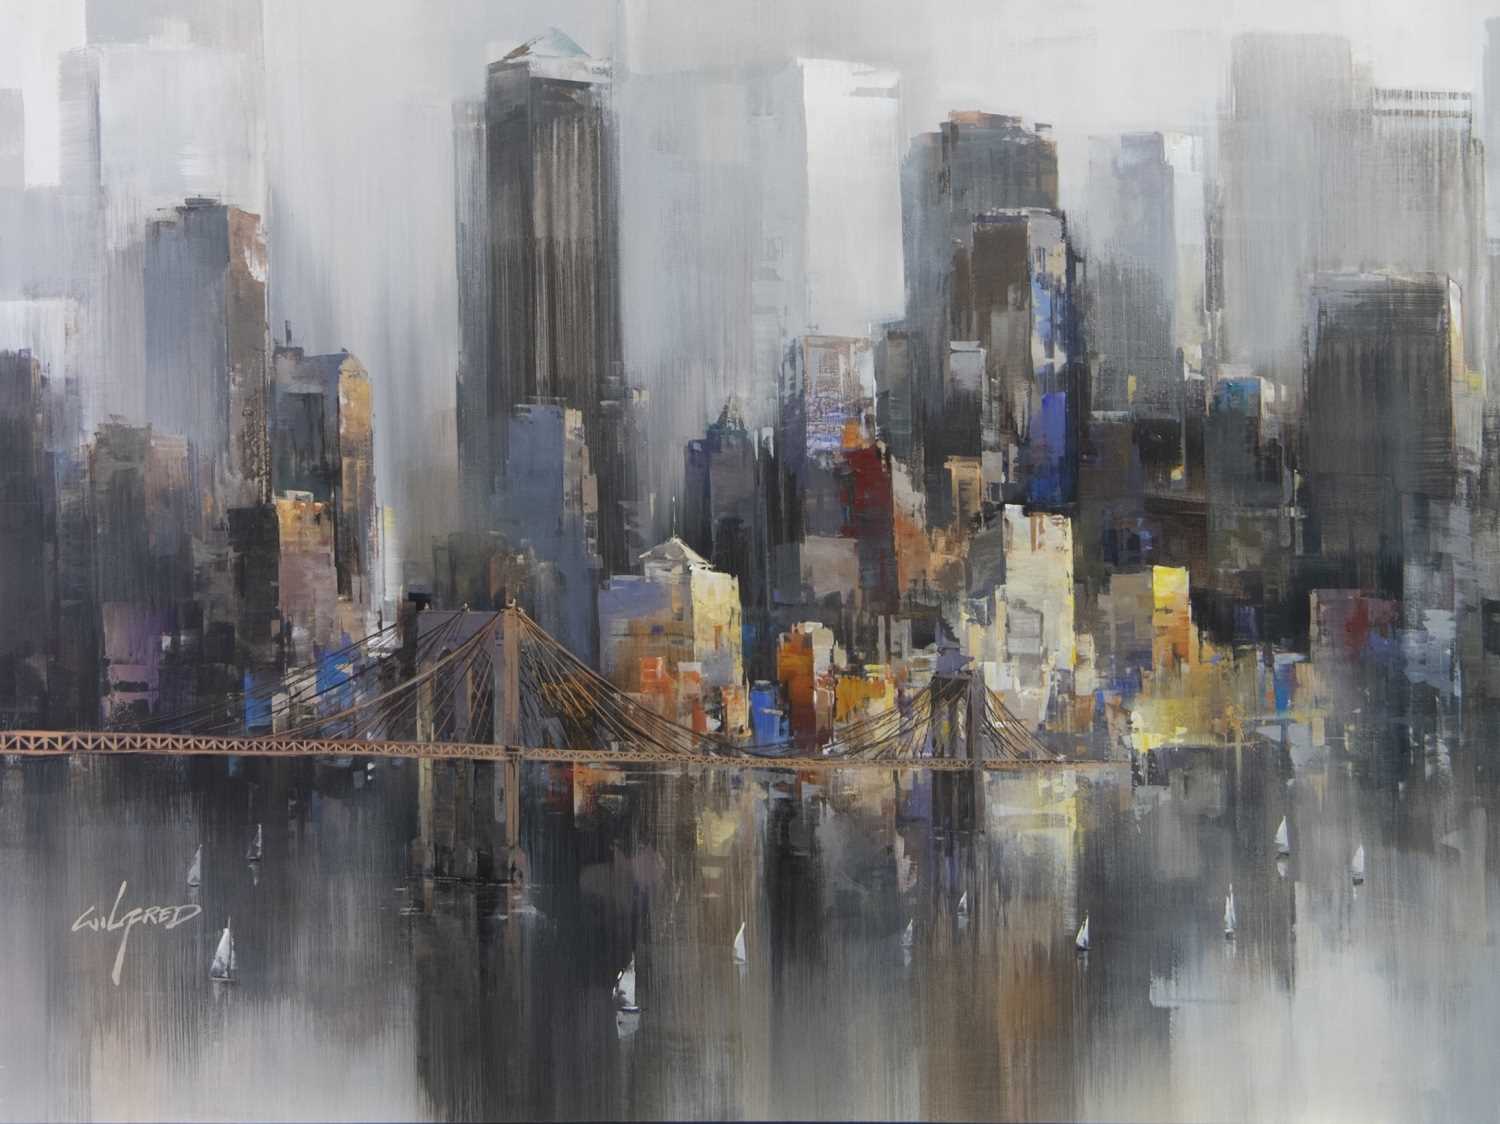 Lot 104 - NEW YORK CROSSIN, A GICLEE PRINT BY WILFRED LANG